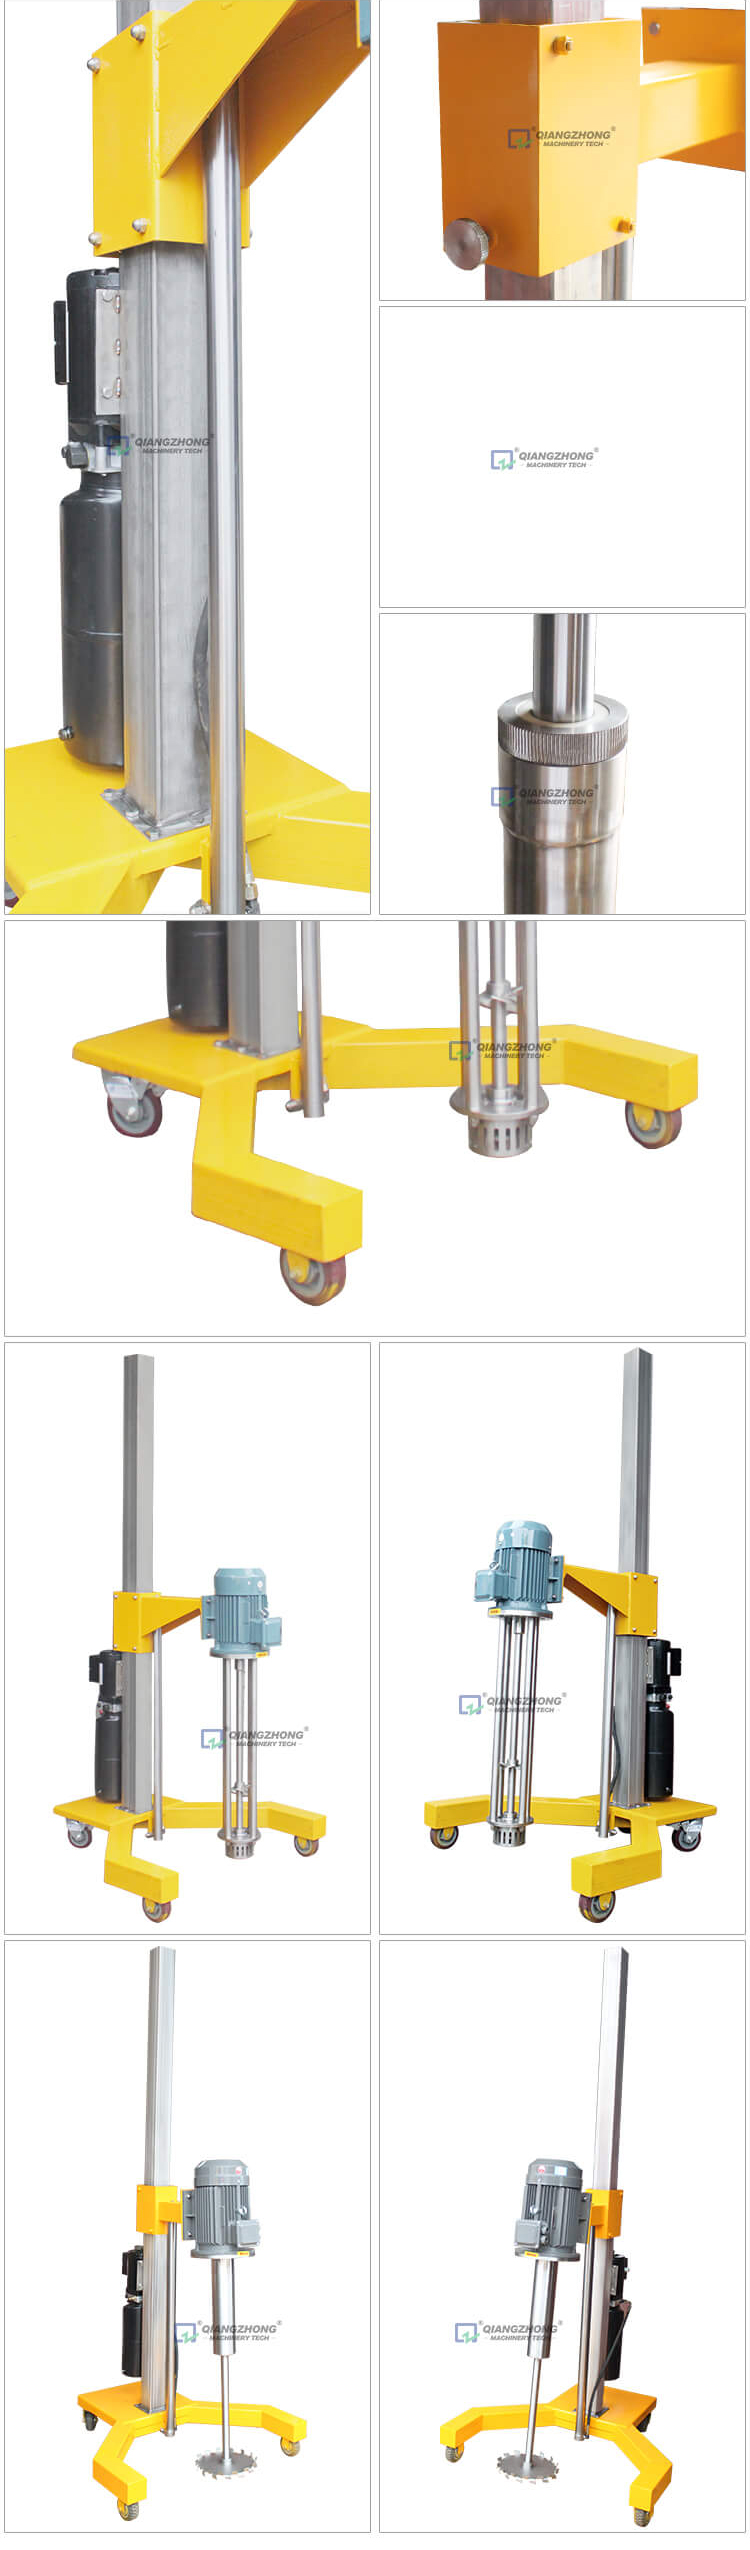 Mobile Hydraulic Lifter 02